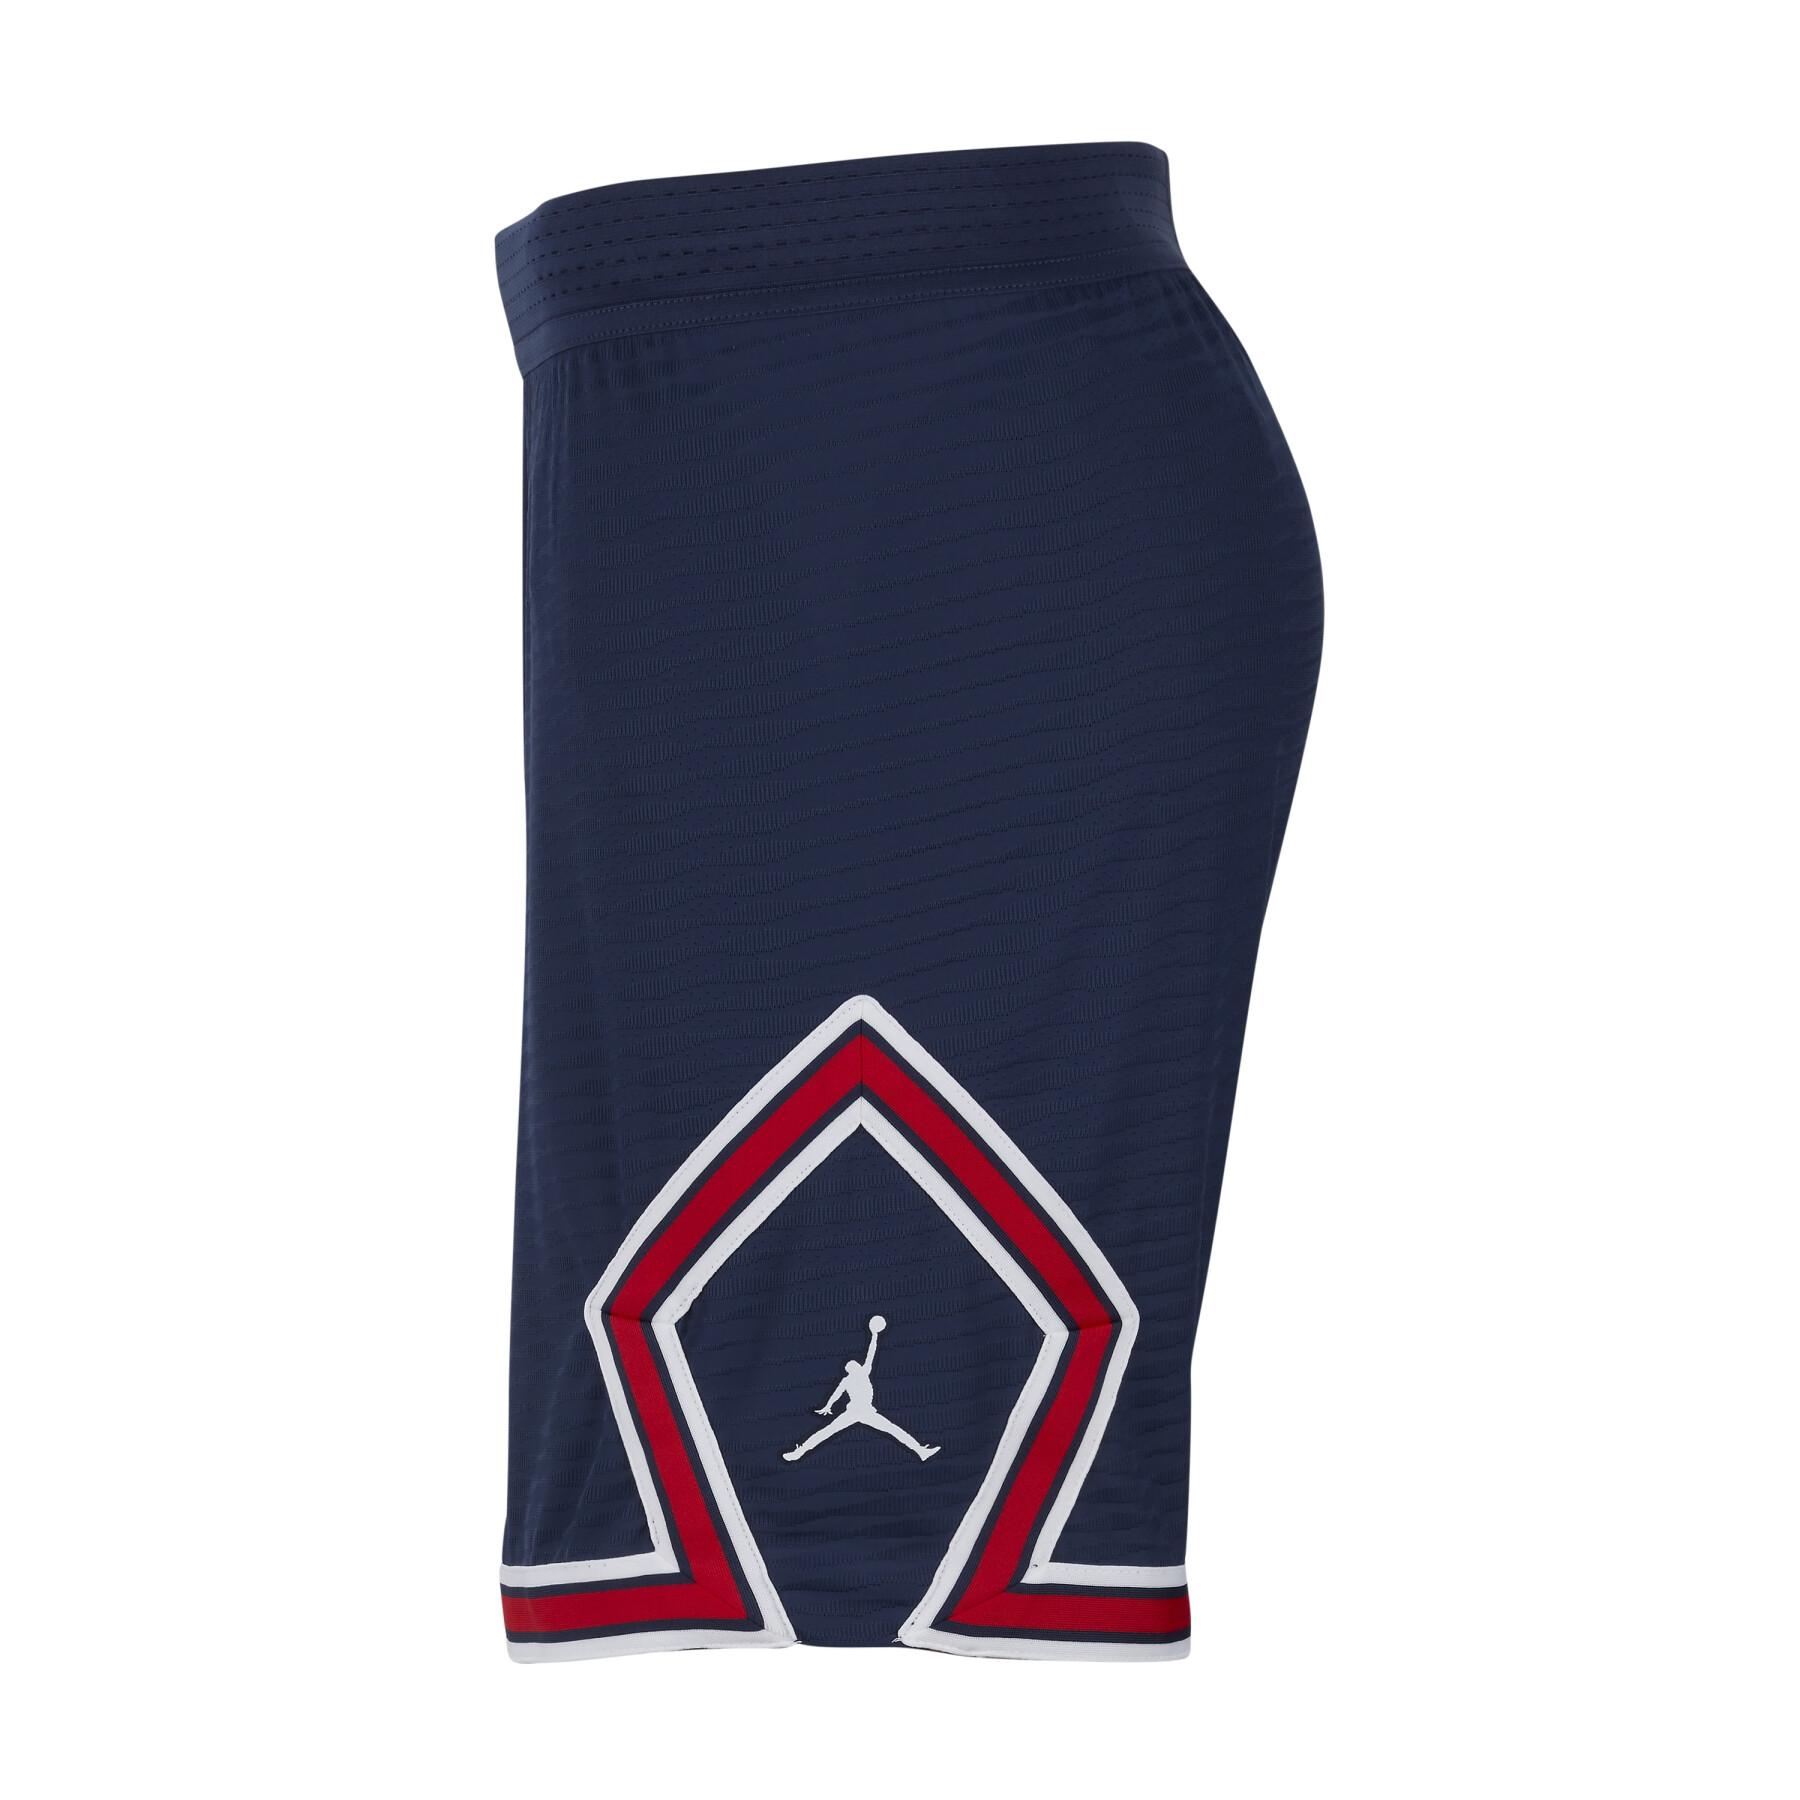 Authentic home shorts PSG 2021/22